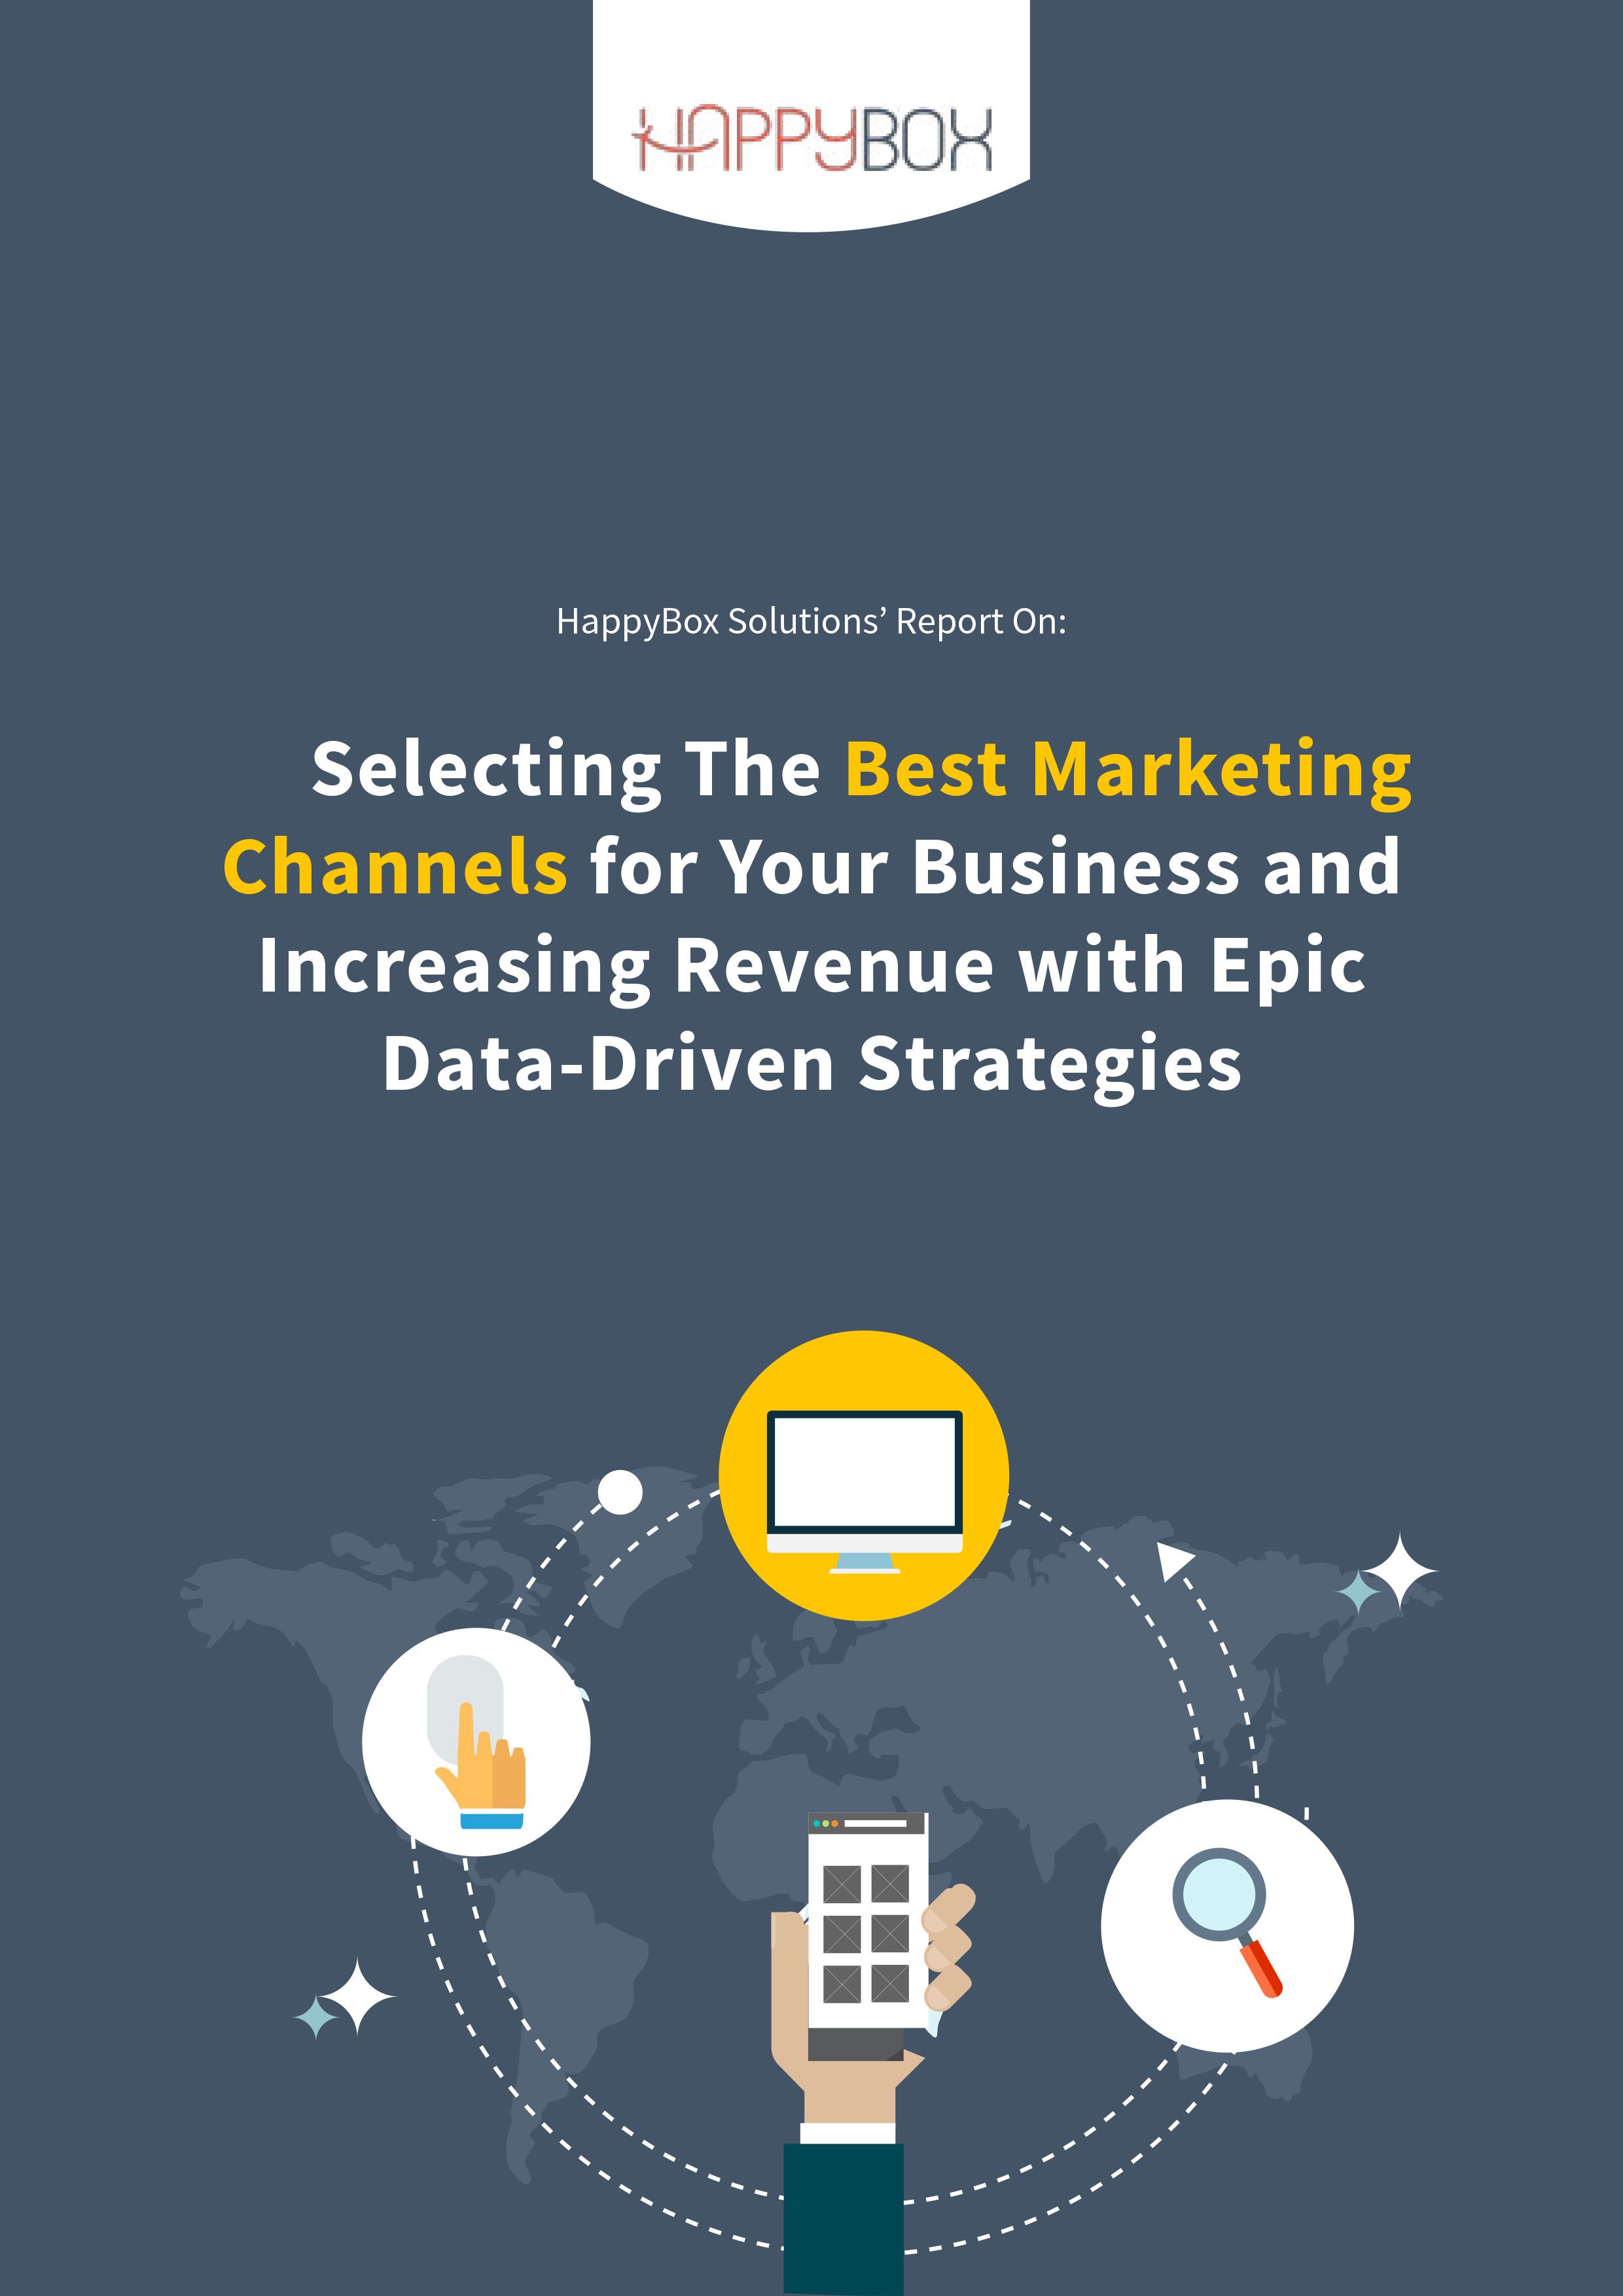 Selecting The Best Marketing Channels for Your Business and Increasing Revenue with Epic Data-Driven Strategies – Happy Box Solutions